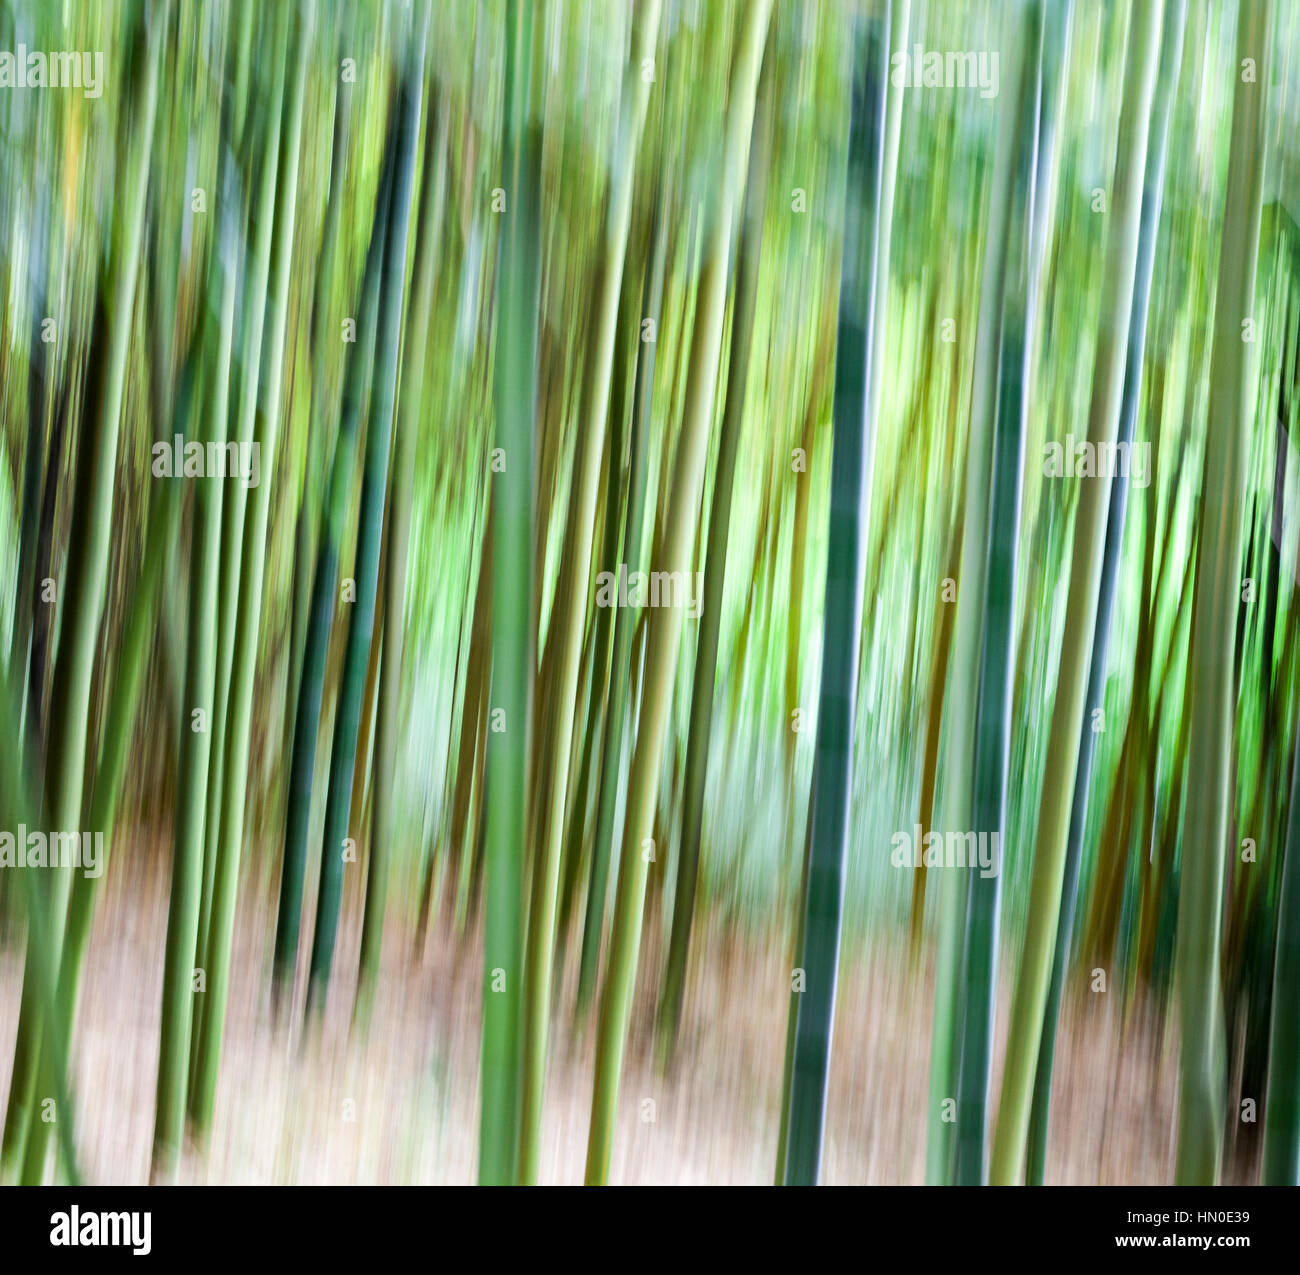 Abstract of bamboo - Phyllostachys Stock Photo